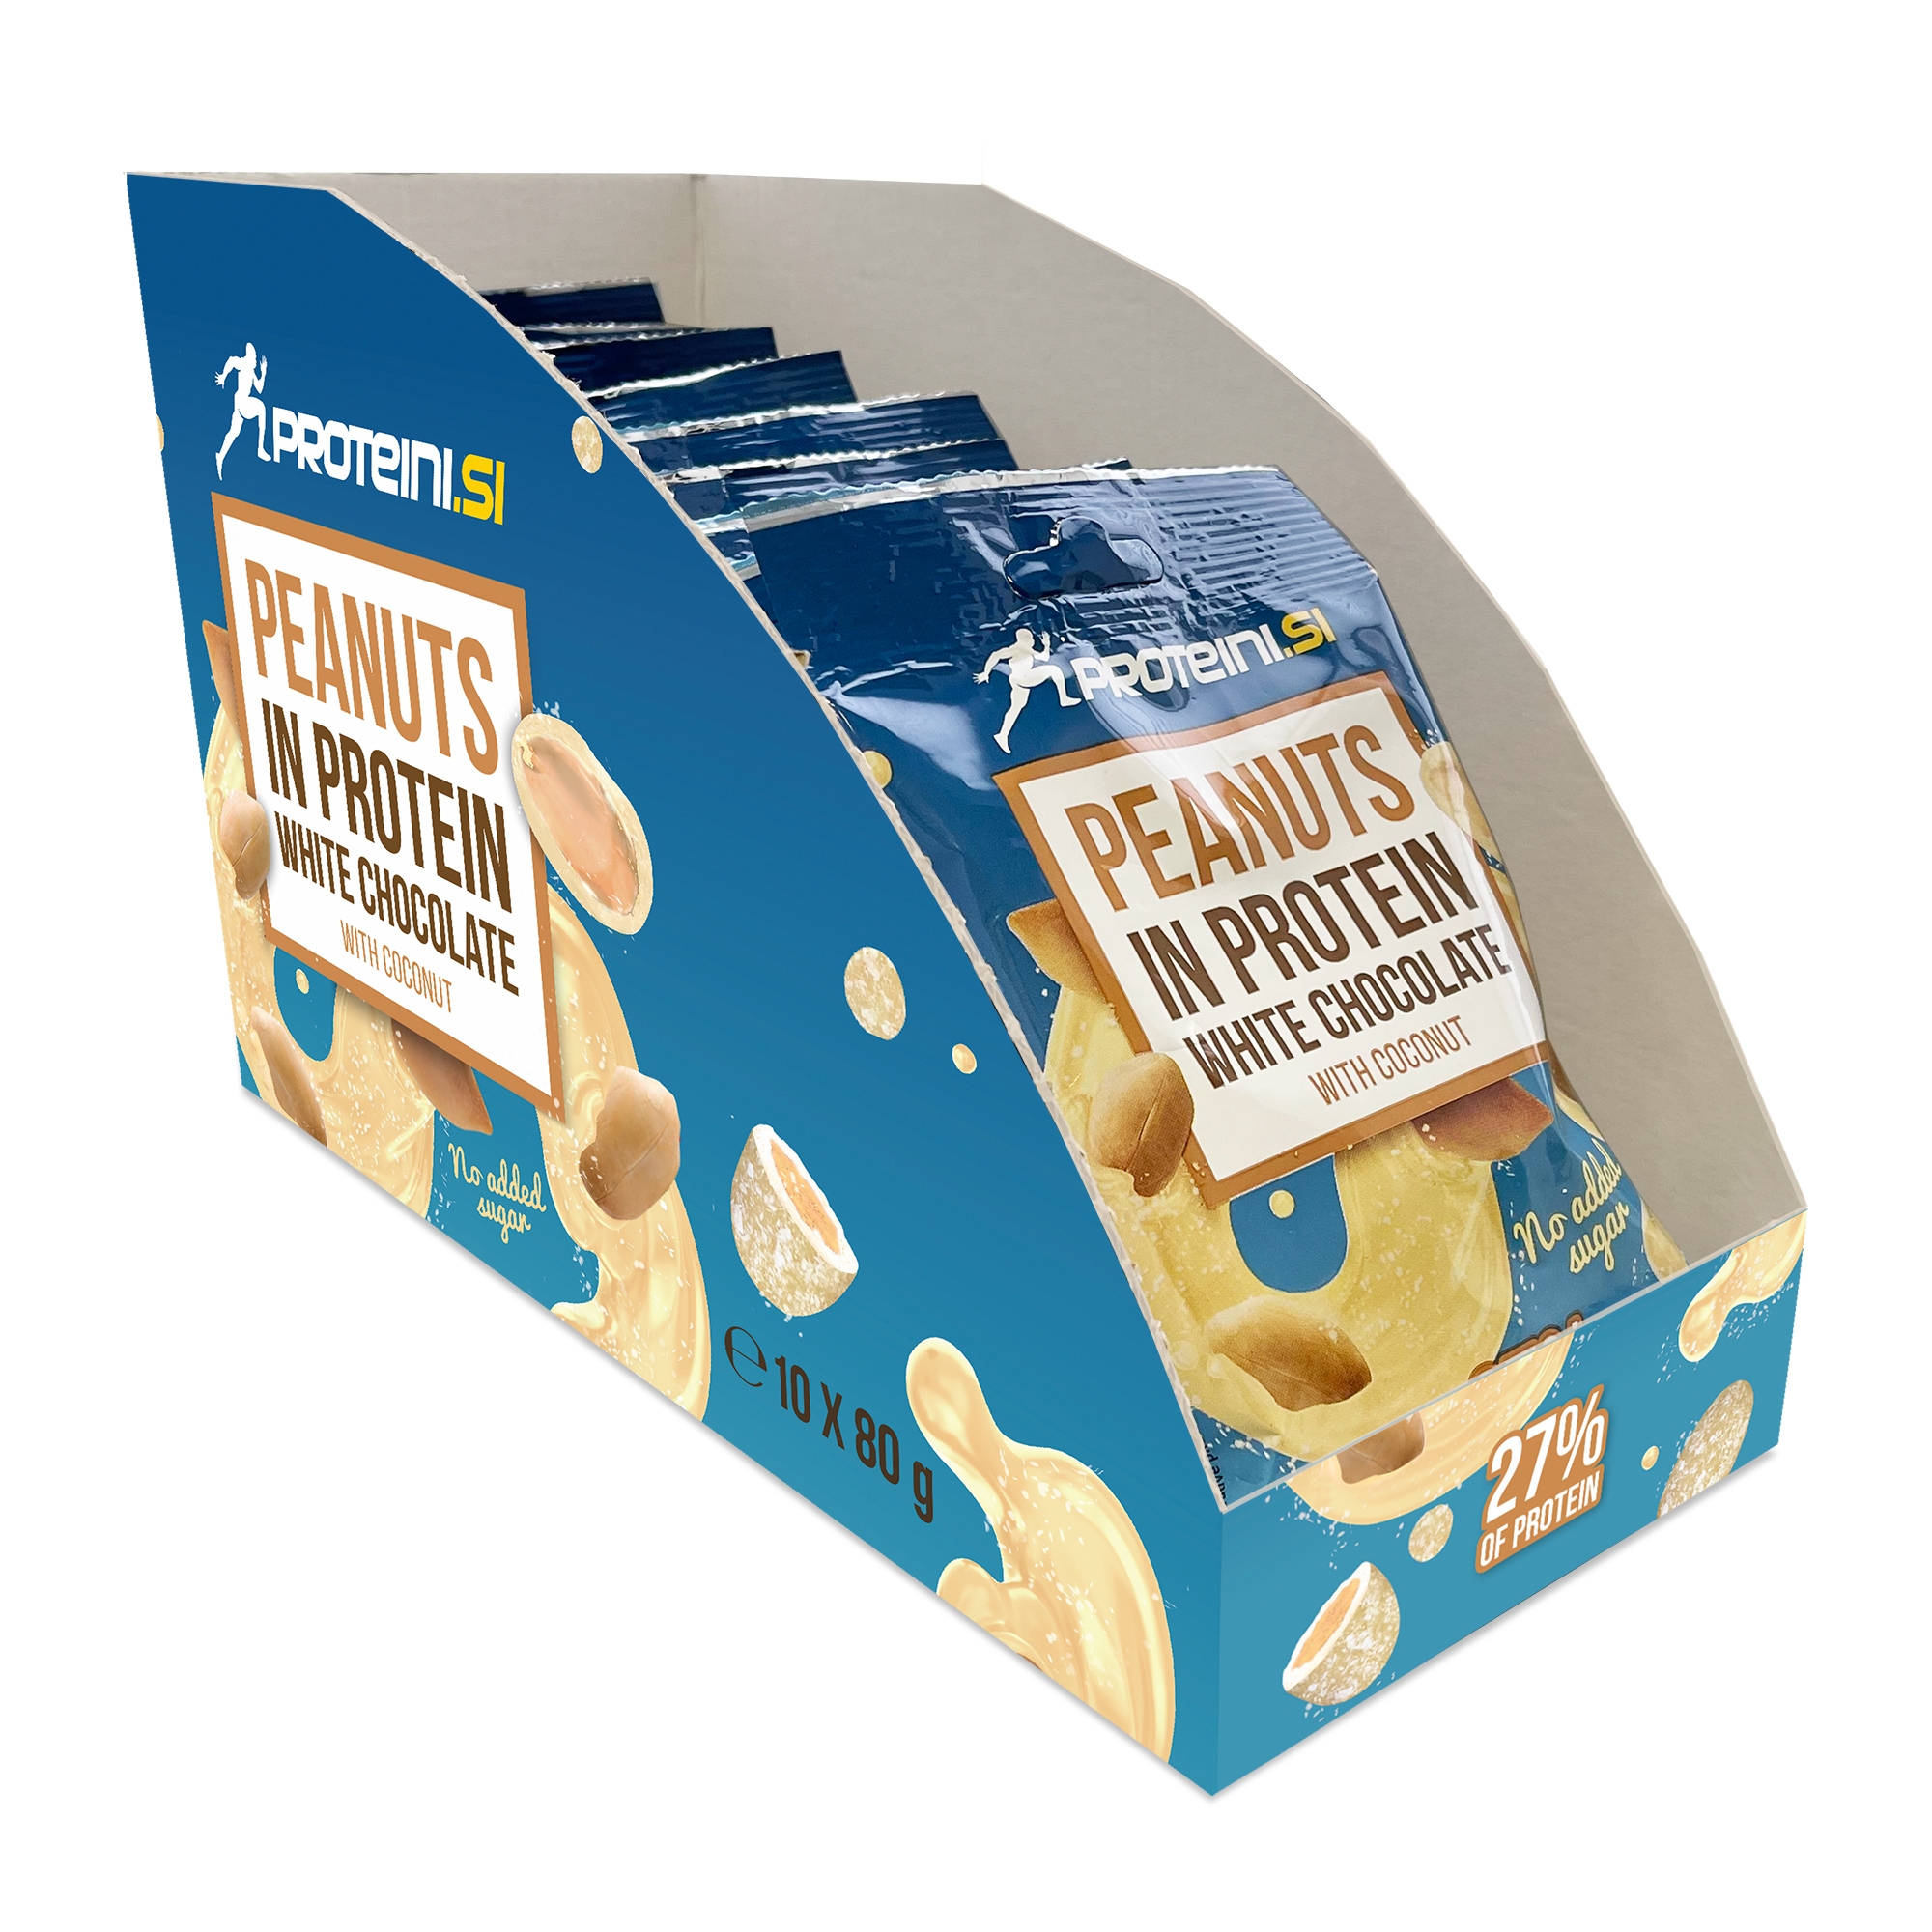 Peanuts In Protein White Chocolate 10x80g